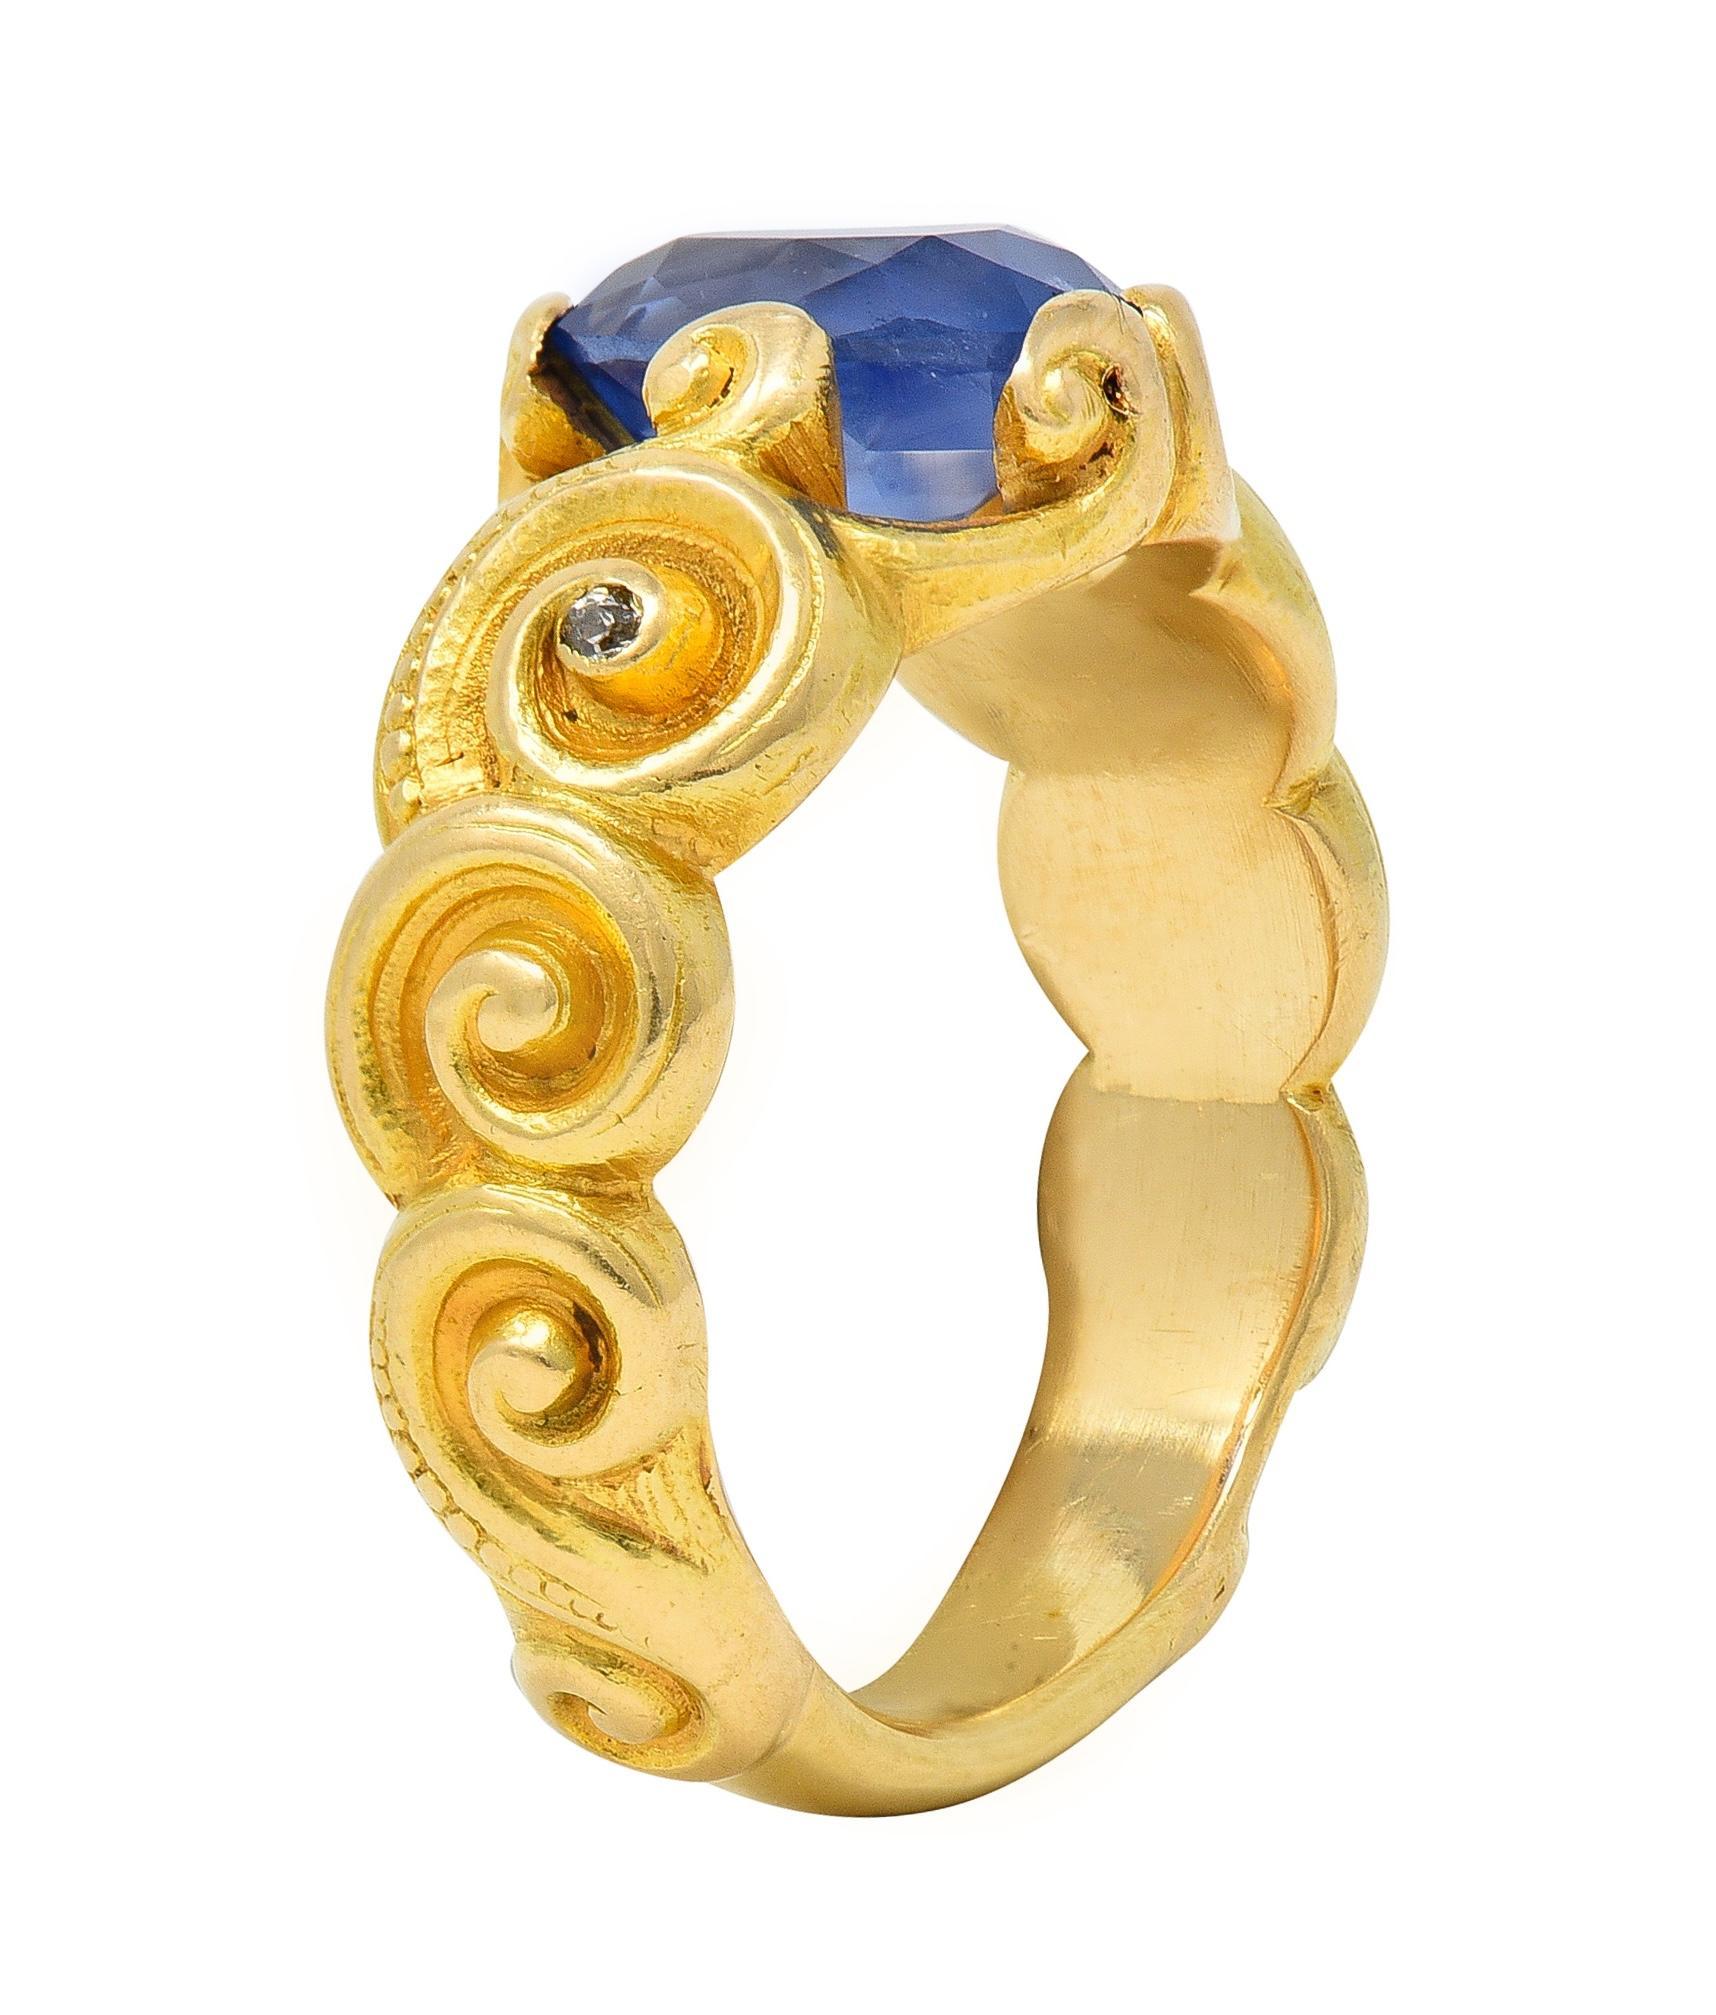 Centering an oval cut sapphire weighing approximately 2.23 carats - transparent light to medium blue 
Set with highly rendered swirl motif prongs with pierced surround 
Flanked by deeply carved swirling shoulders with beading detail
Accented by